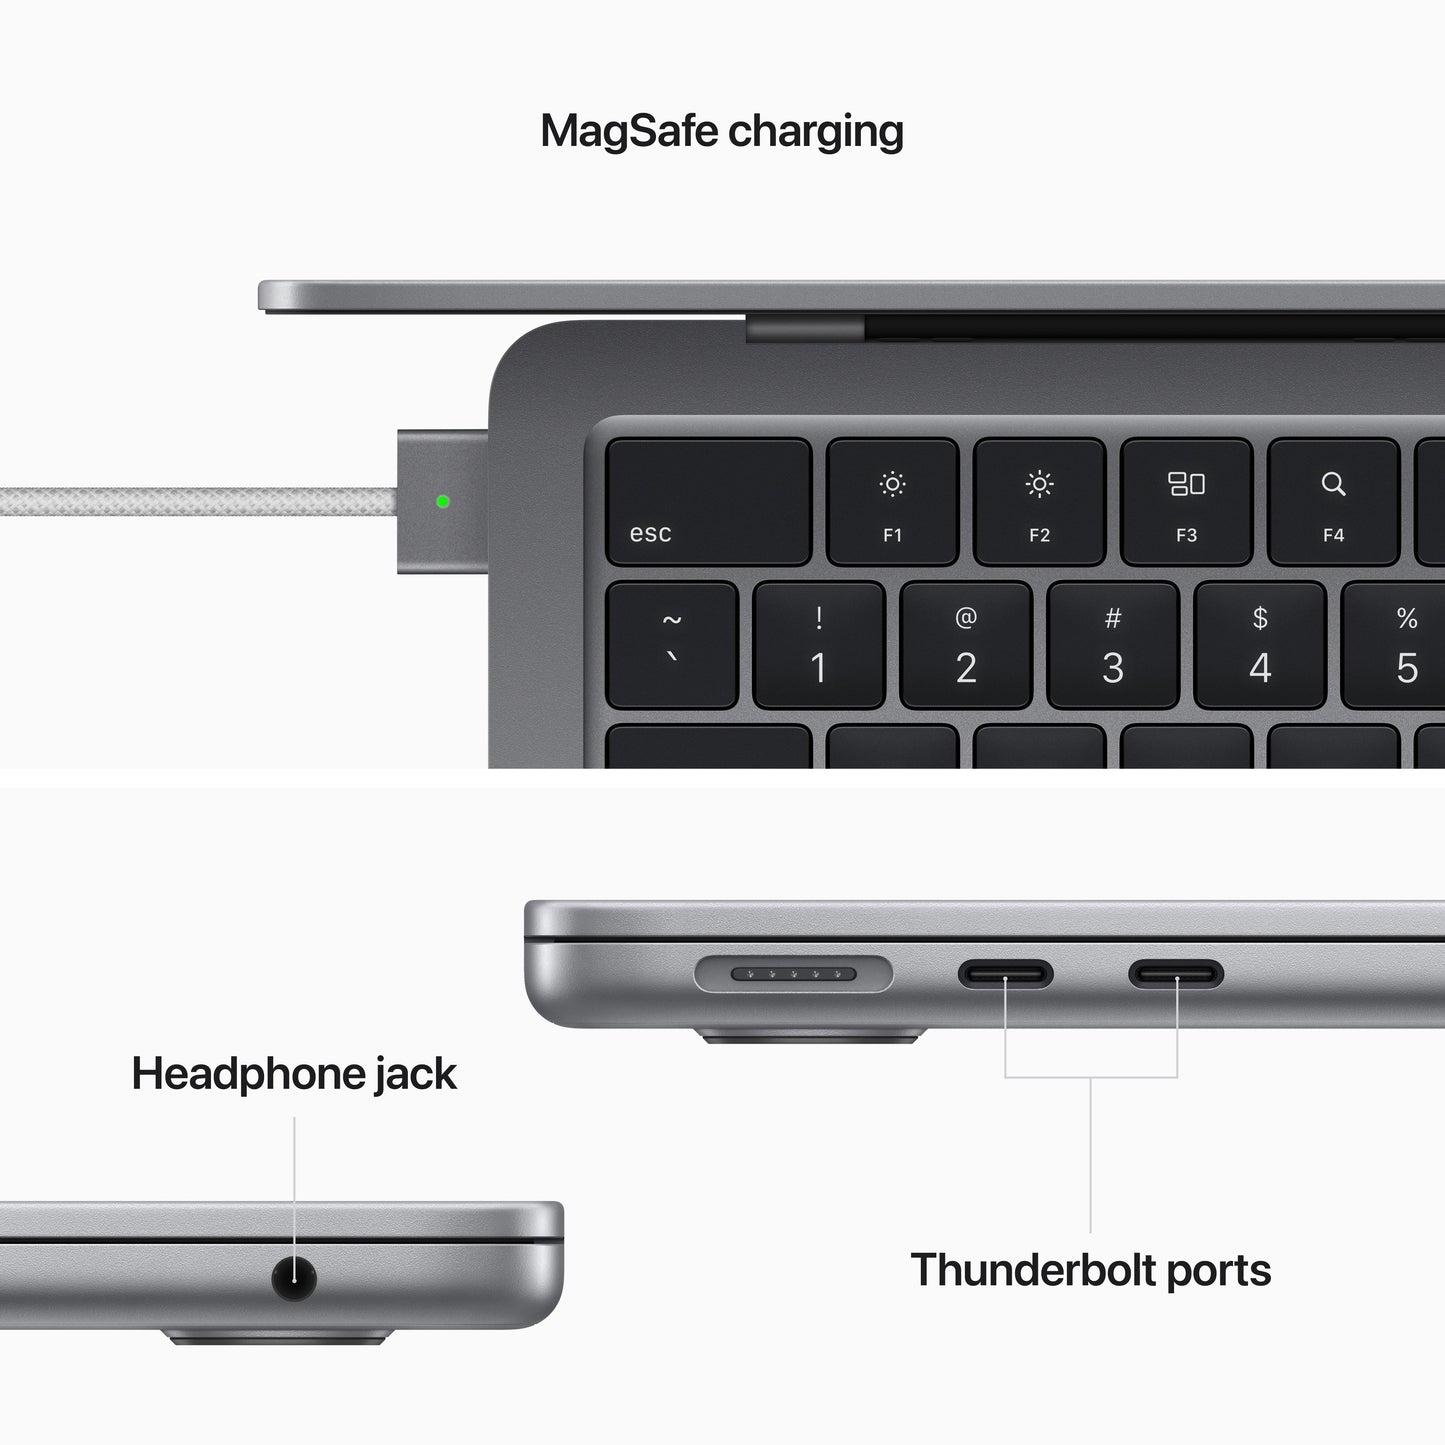 13-inch MacBook Air: Apple M2 chip with 8‑core CPU and 10‑core GPU, 512GB SSD - Space Gray (Keyboard: English)